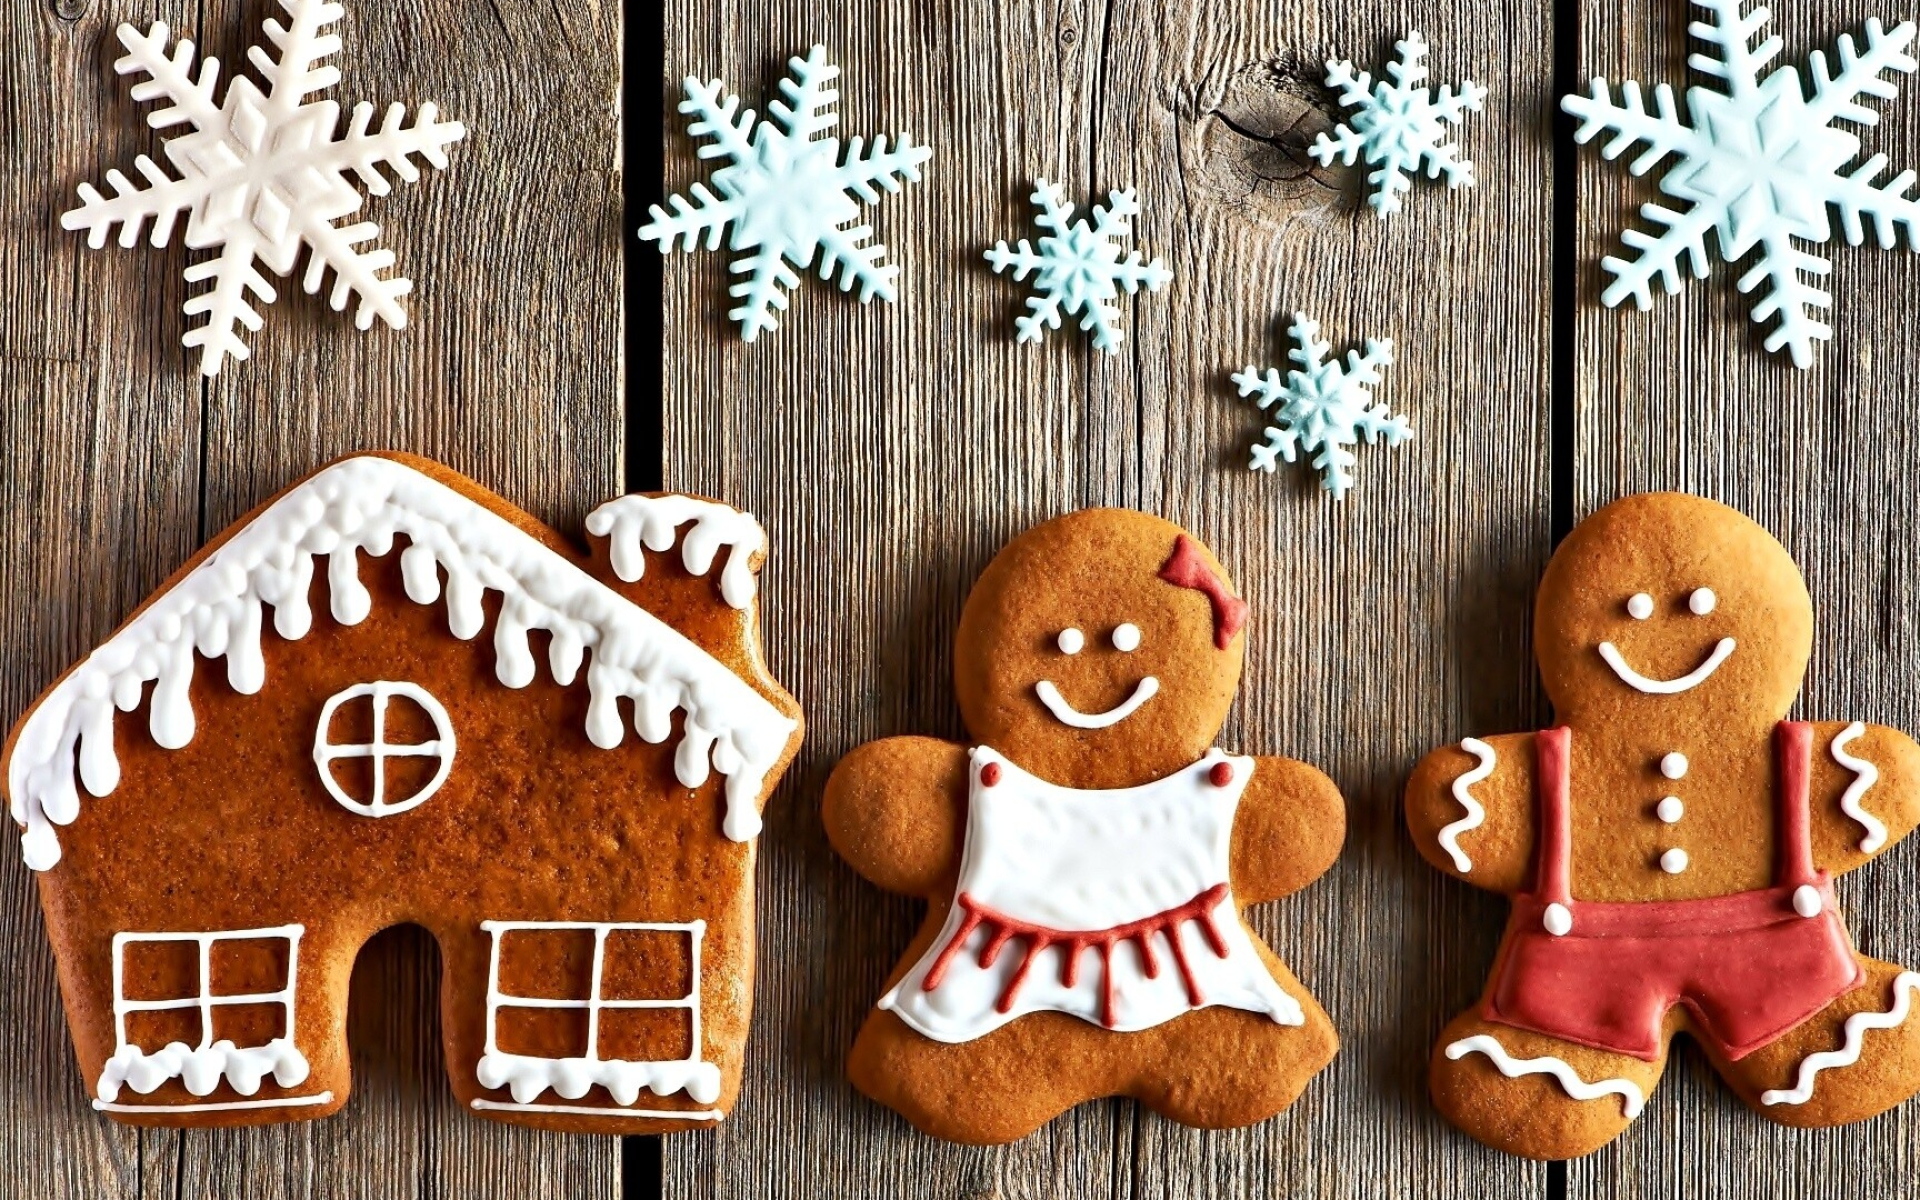 Gingerbread home, Starry night, Human touch, Full HD wallpapers, 1920x1200 HD Desktop